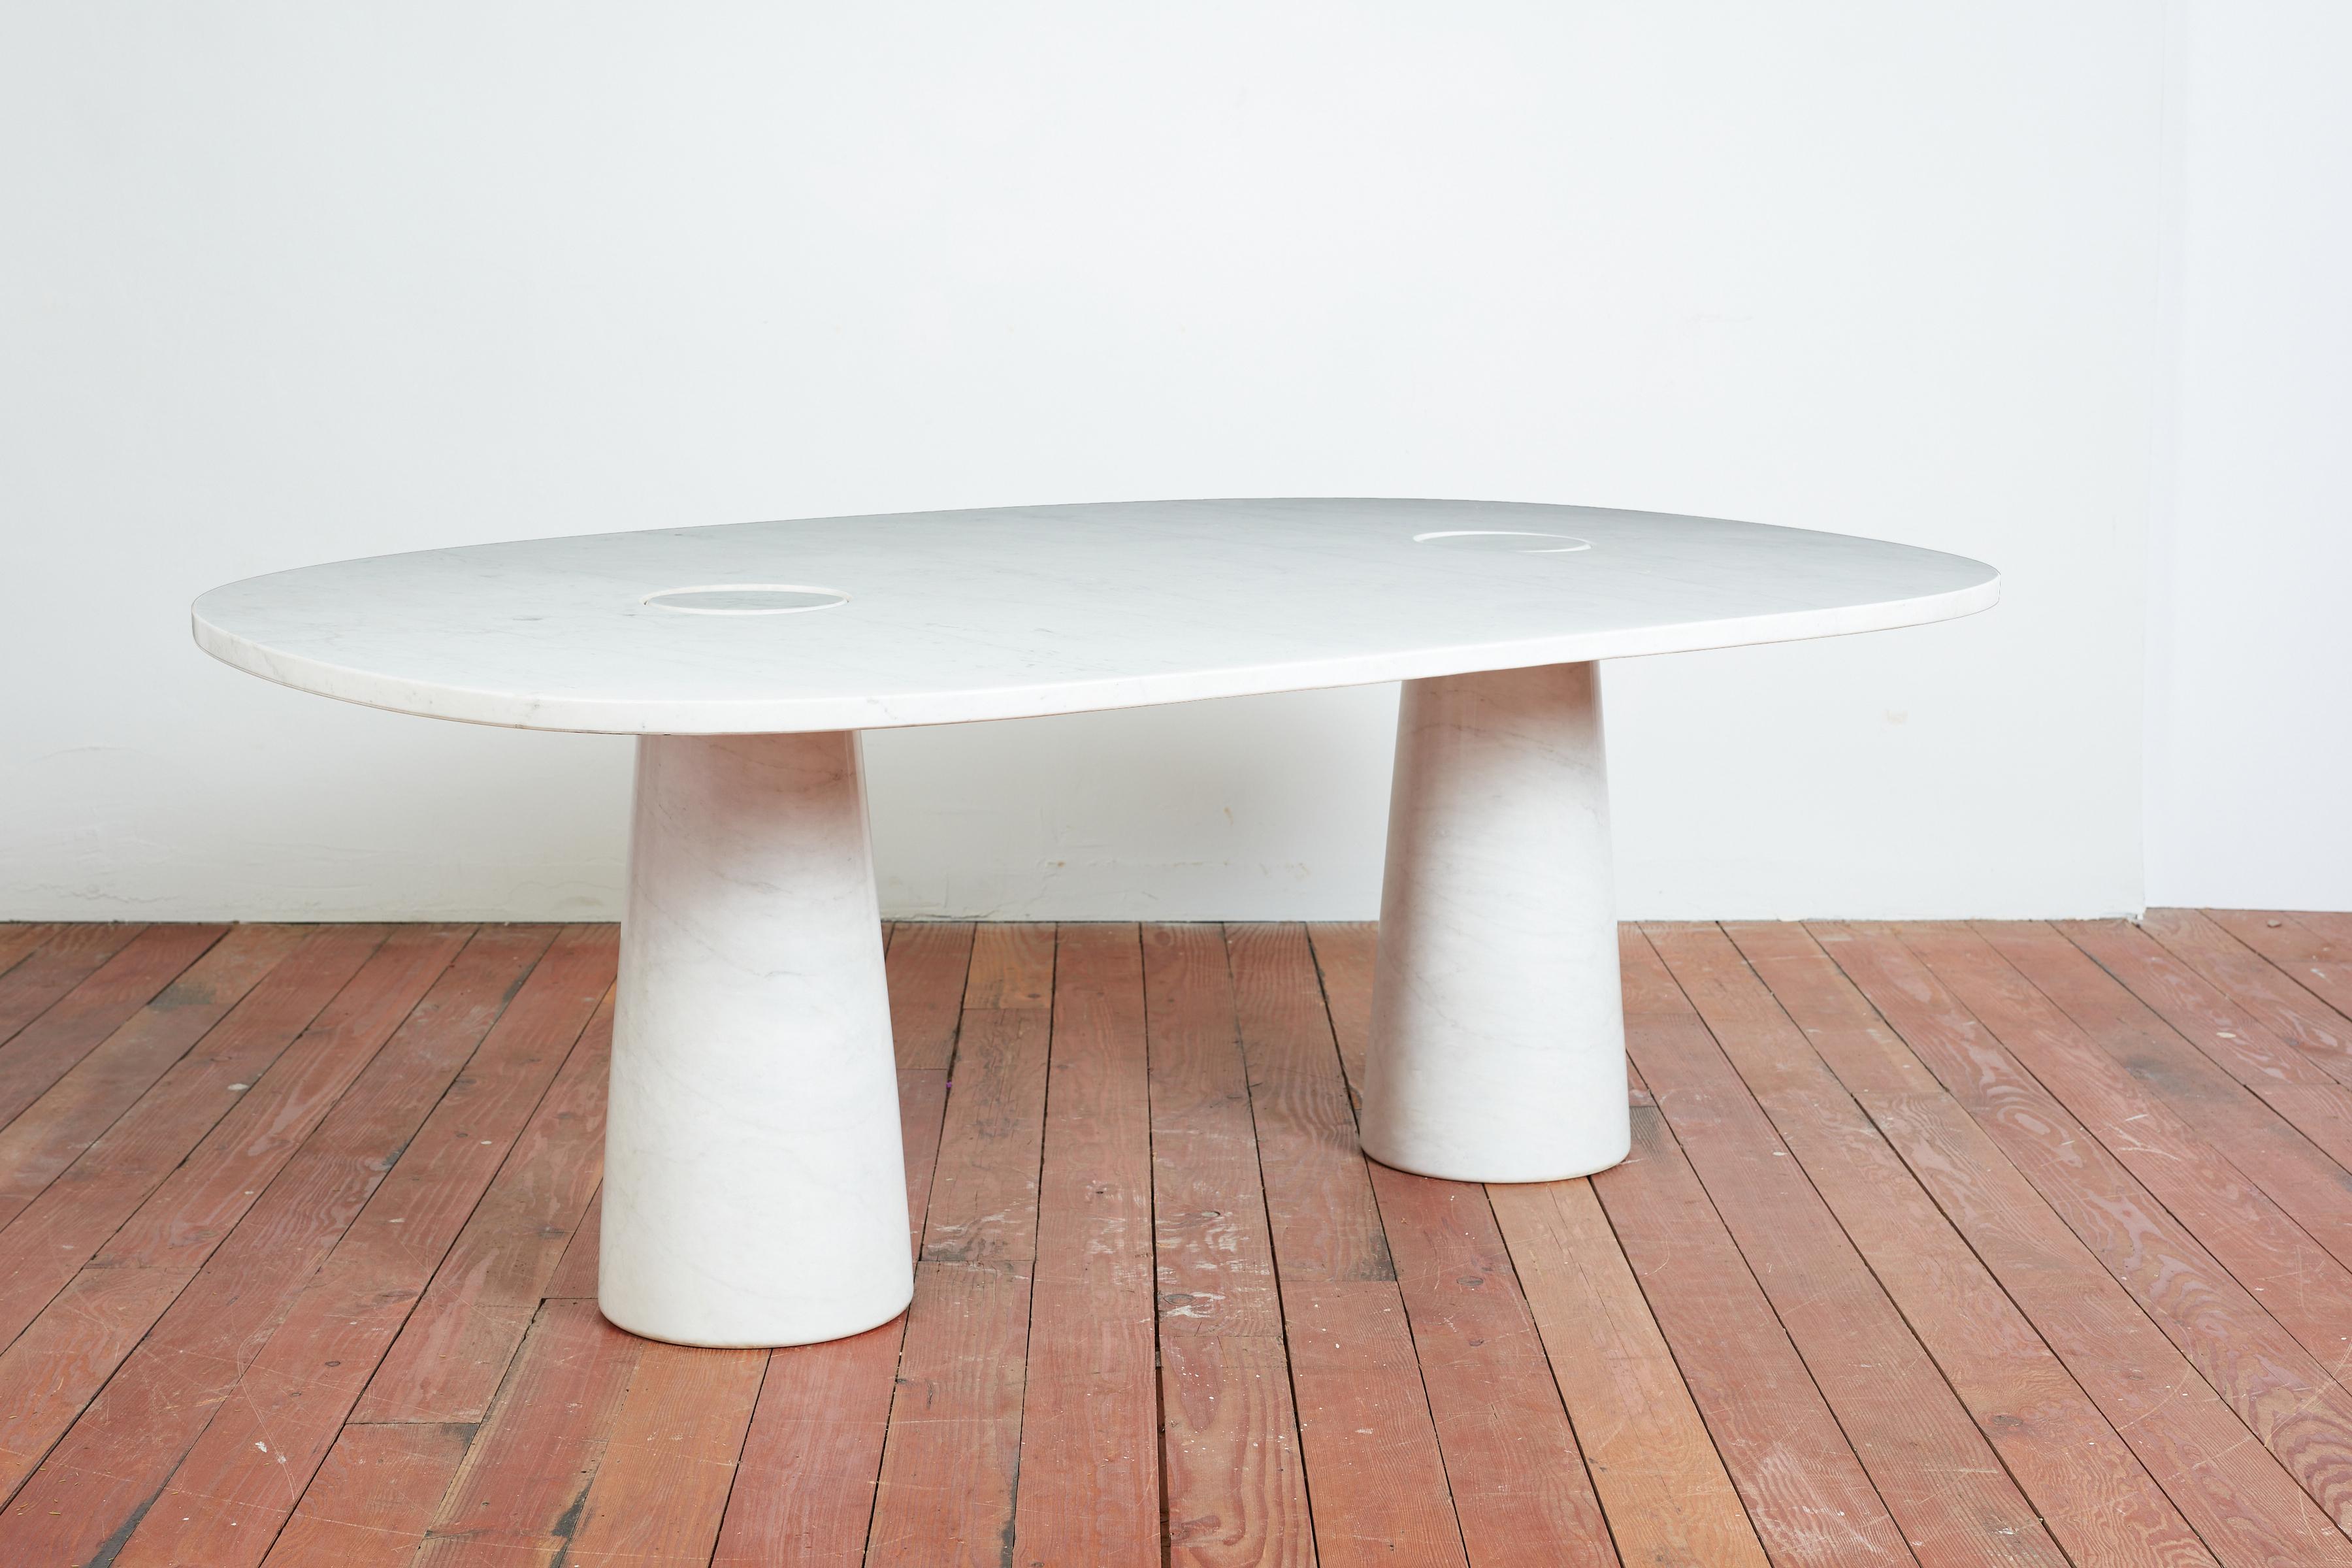 
Rare shaped white Carrara marble dining table by Angelo Mangiarotti in gorgeous Cararra marble.

Part of the Eros series for Skipper, Italy, 1971. 

2 gigantic cylinder columns support the table top creating extra space for legroom Wonderful rare